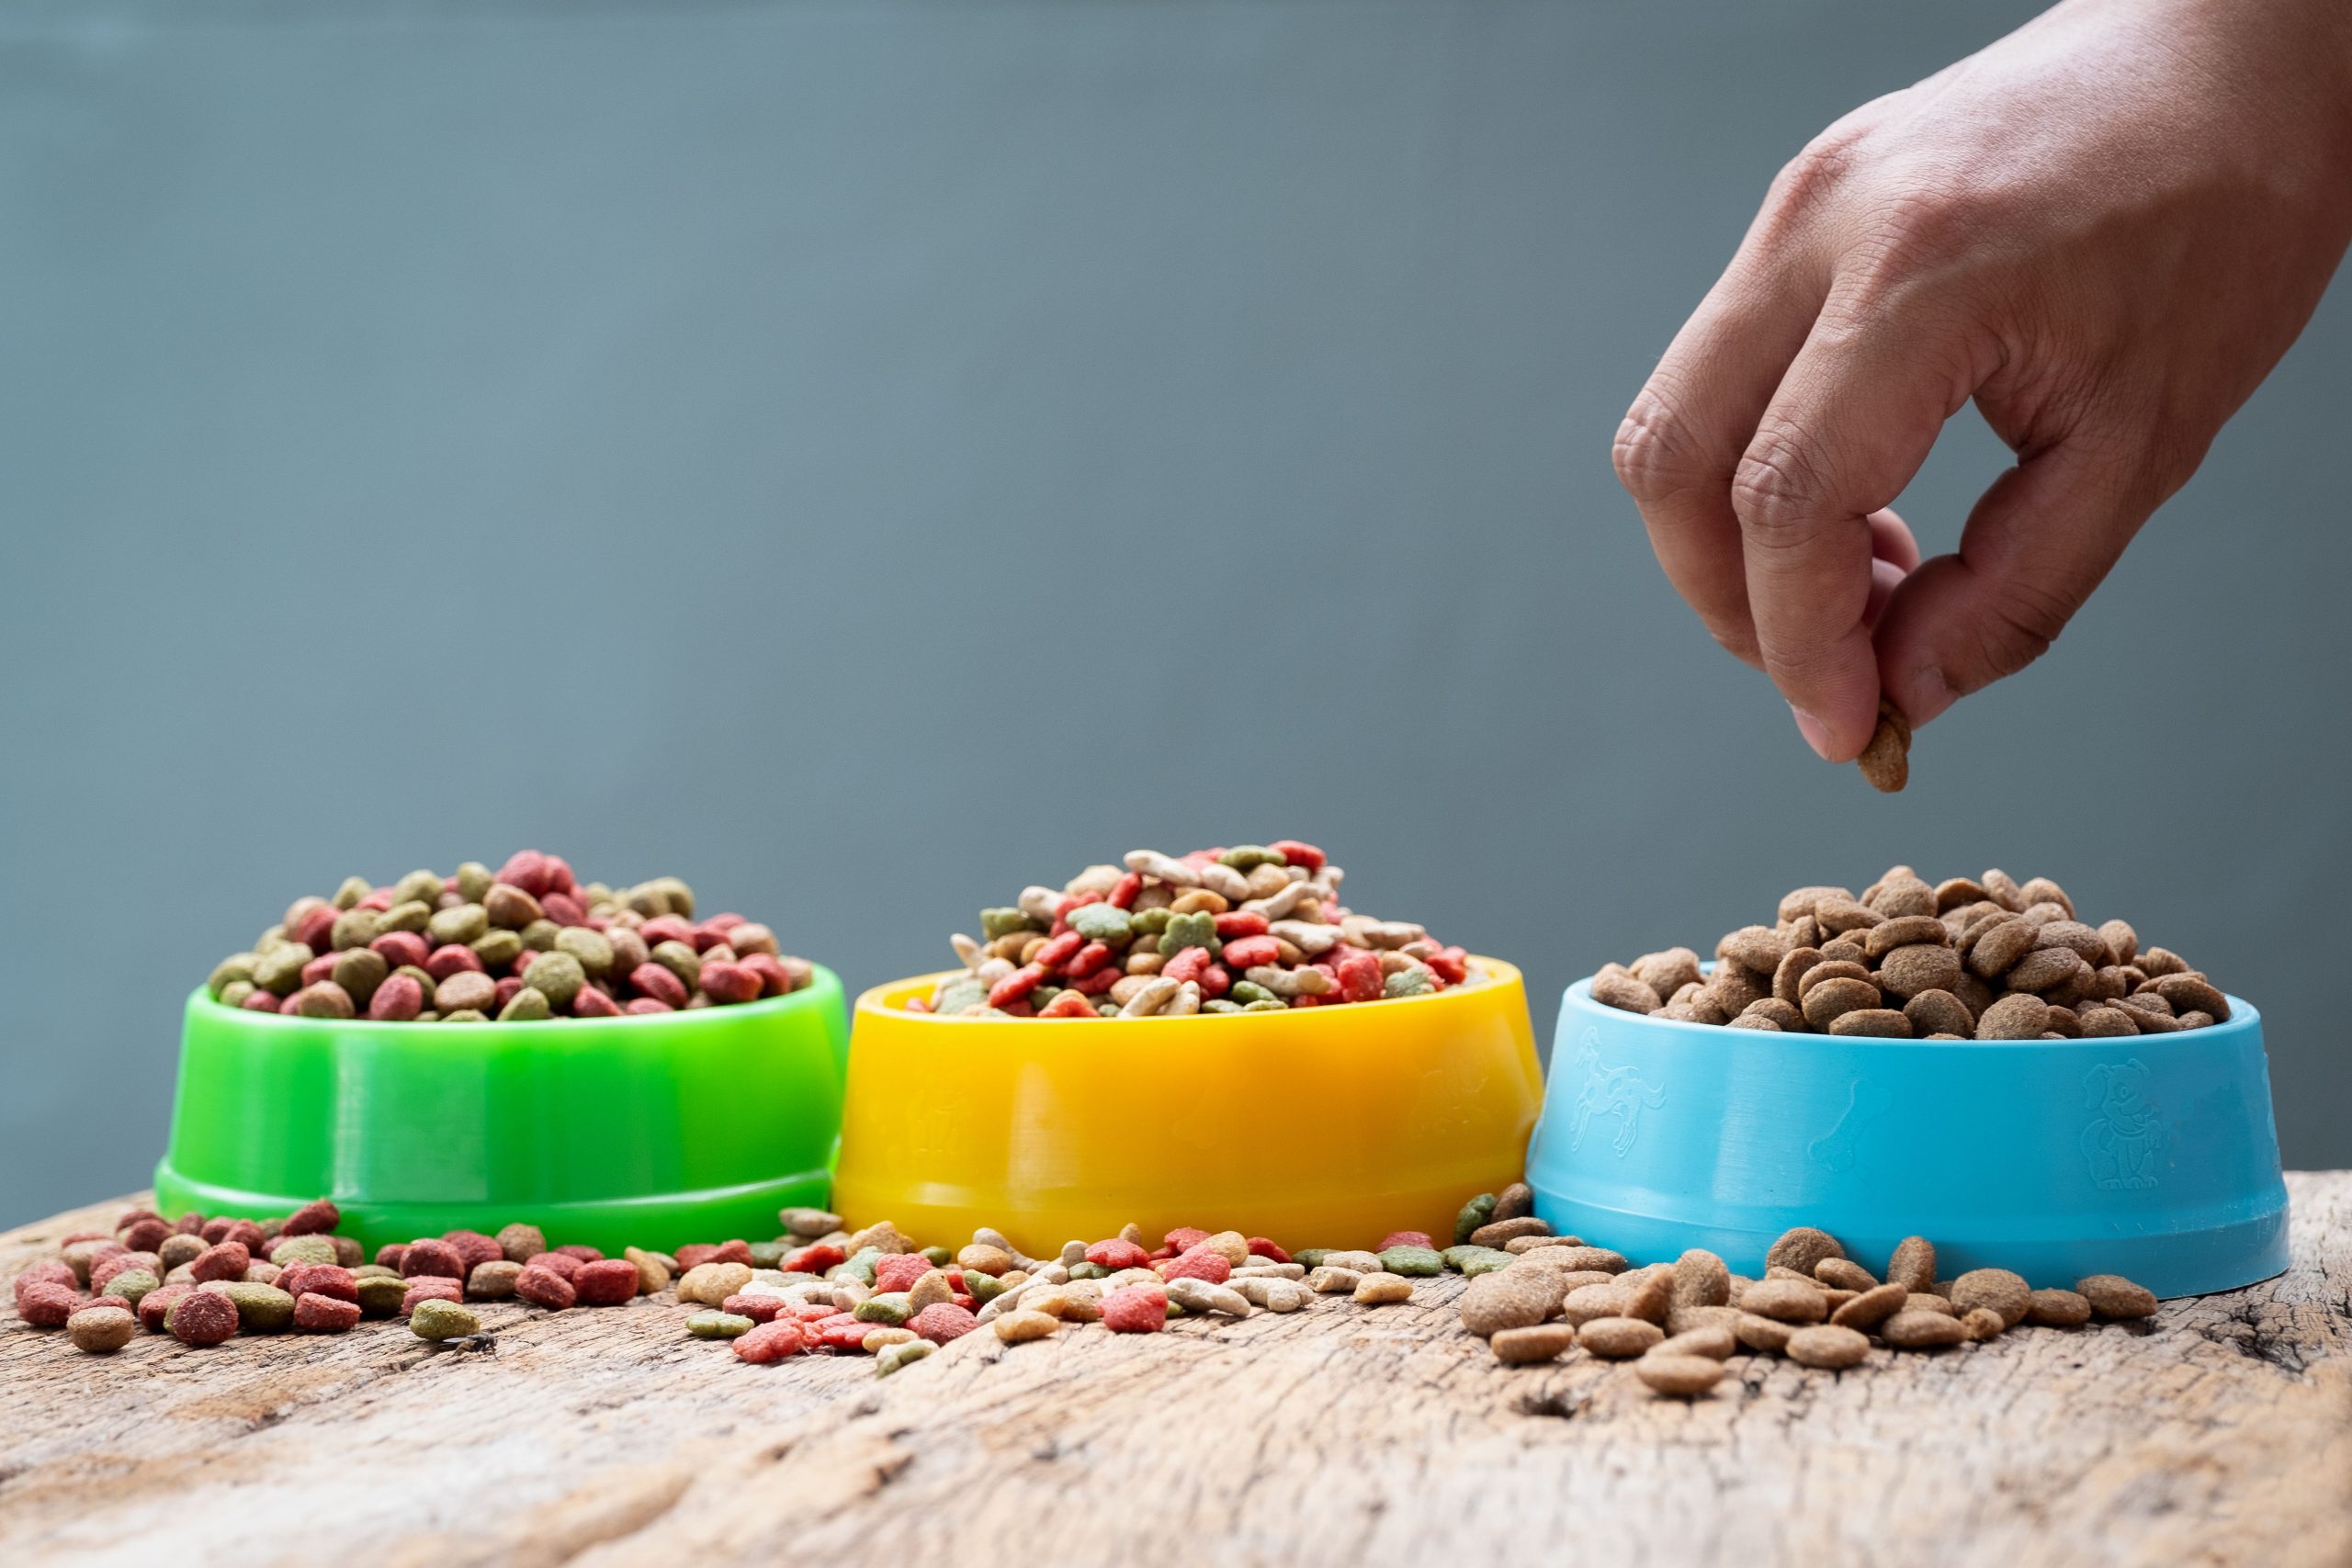 Dry Dog Food: What to Look For and What to Avoid When Buying